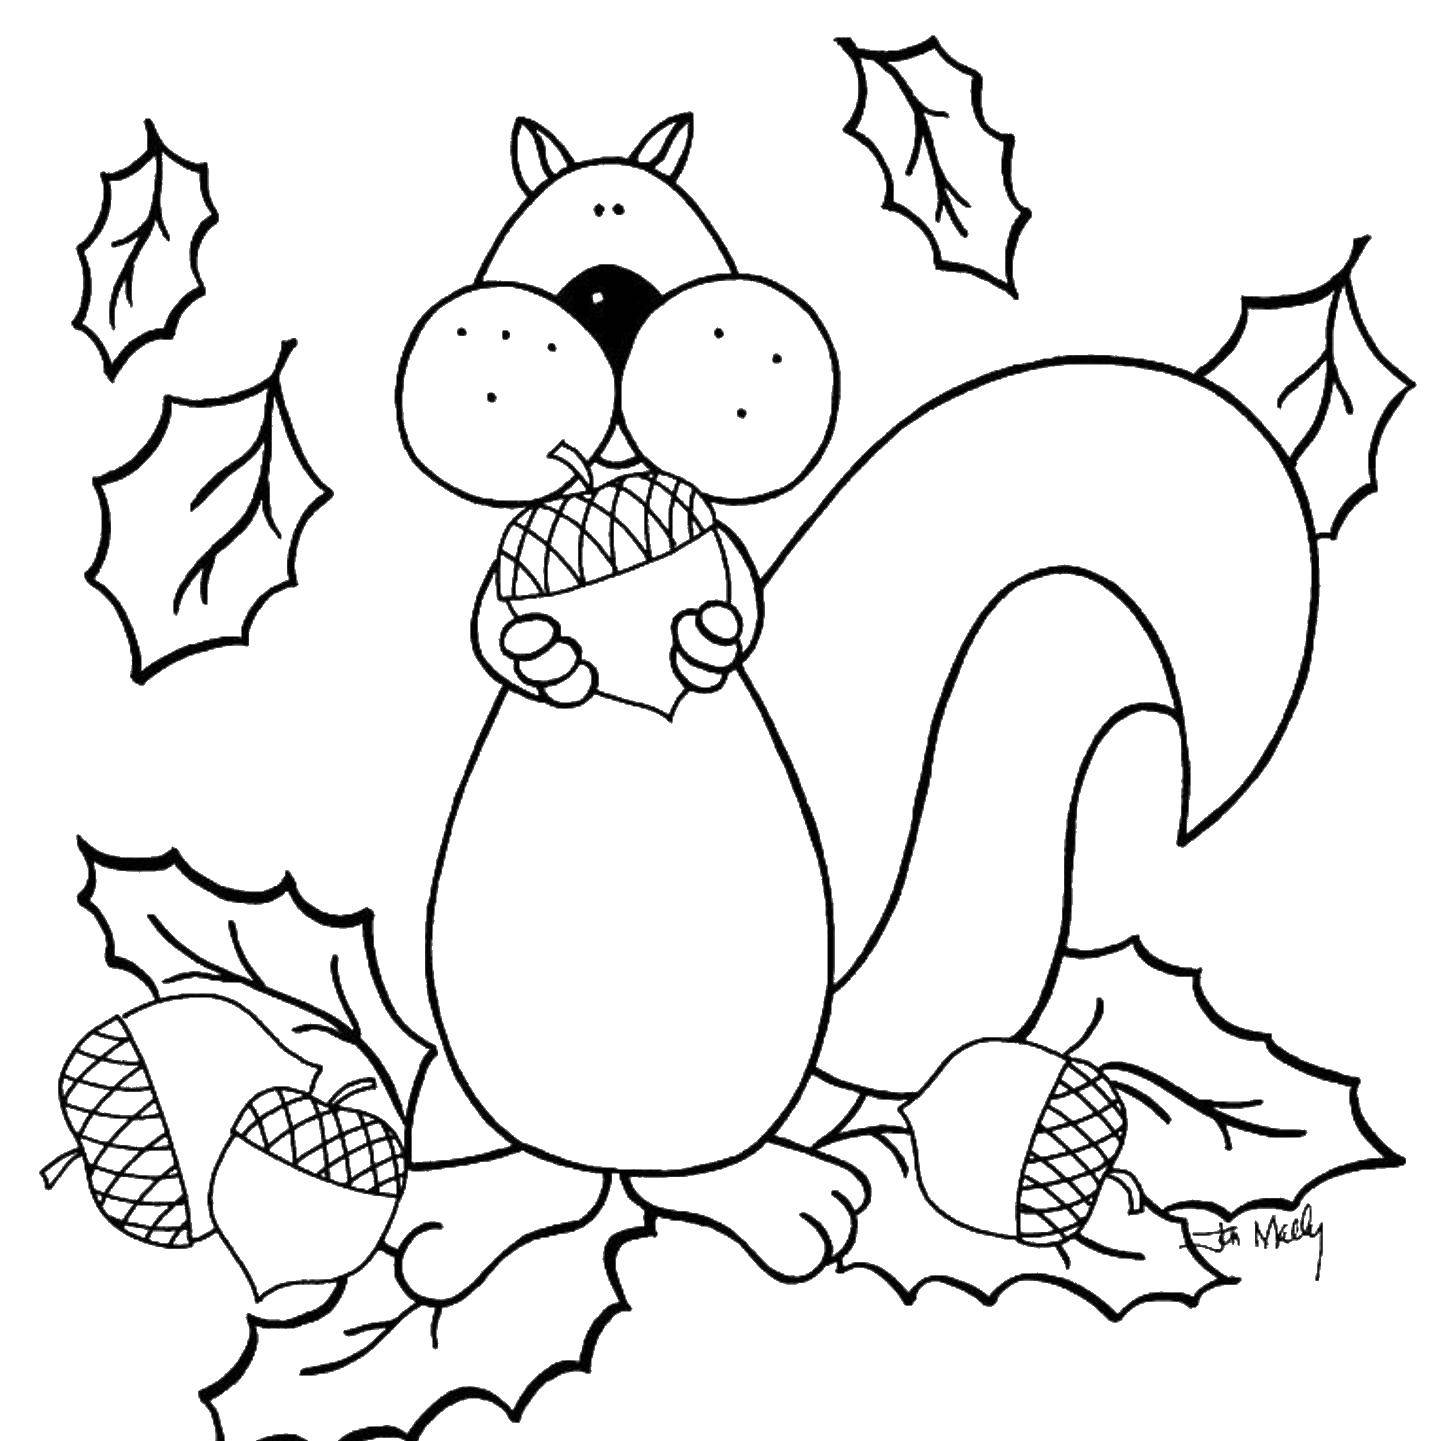 Coloring A squirrel with a nut. Category Autumn. Tags:  protein, nuts.